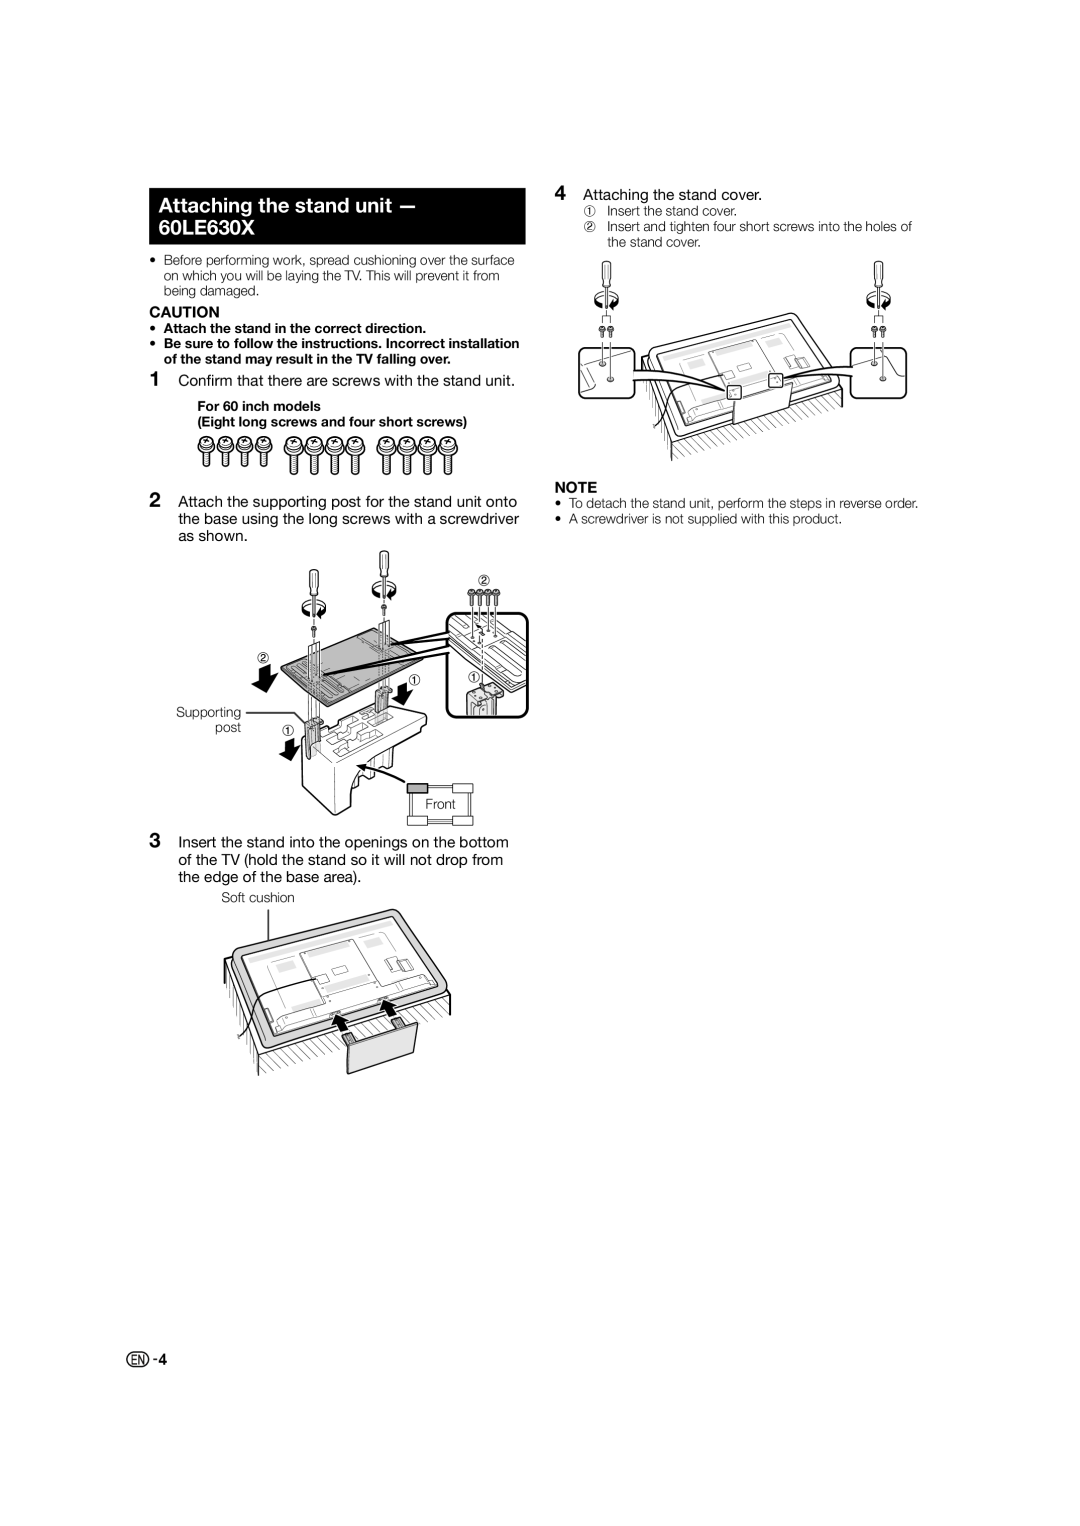 Sharp LC-60LE630X, LC-46LE530X Attaching the stand unit, Be sure to follow the instructions. Incorrect installation 